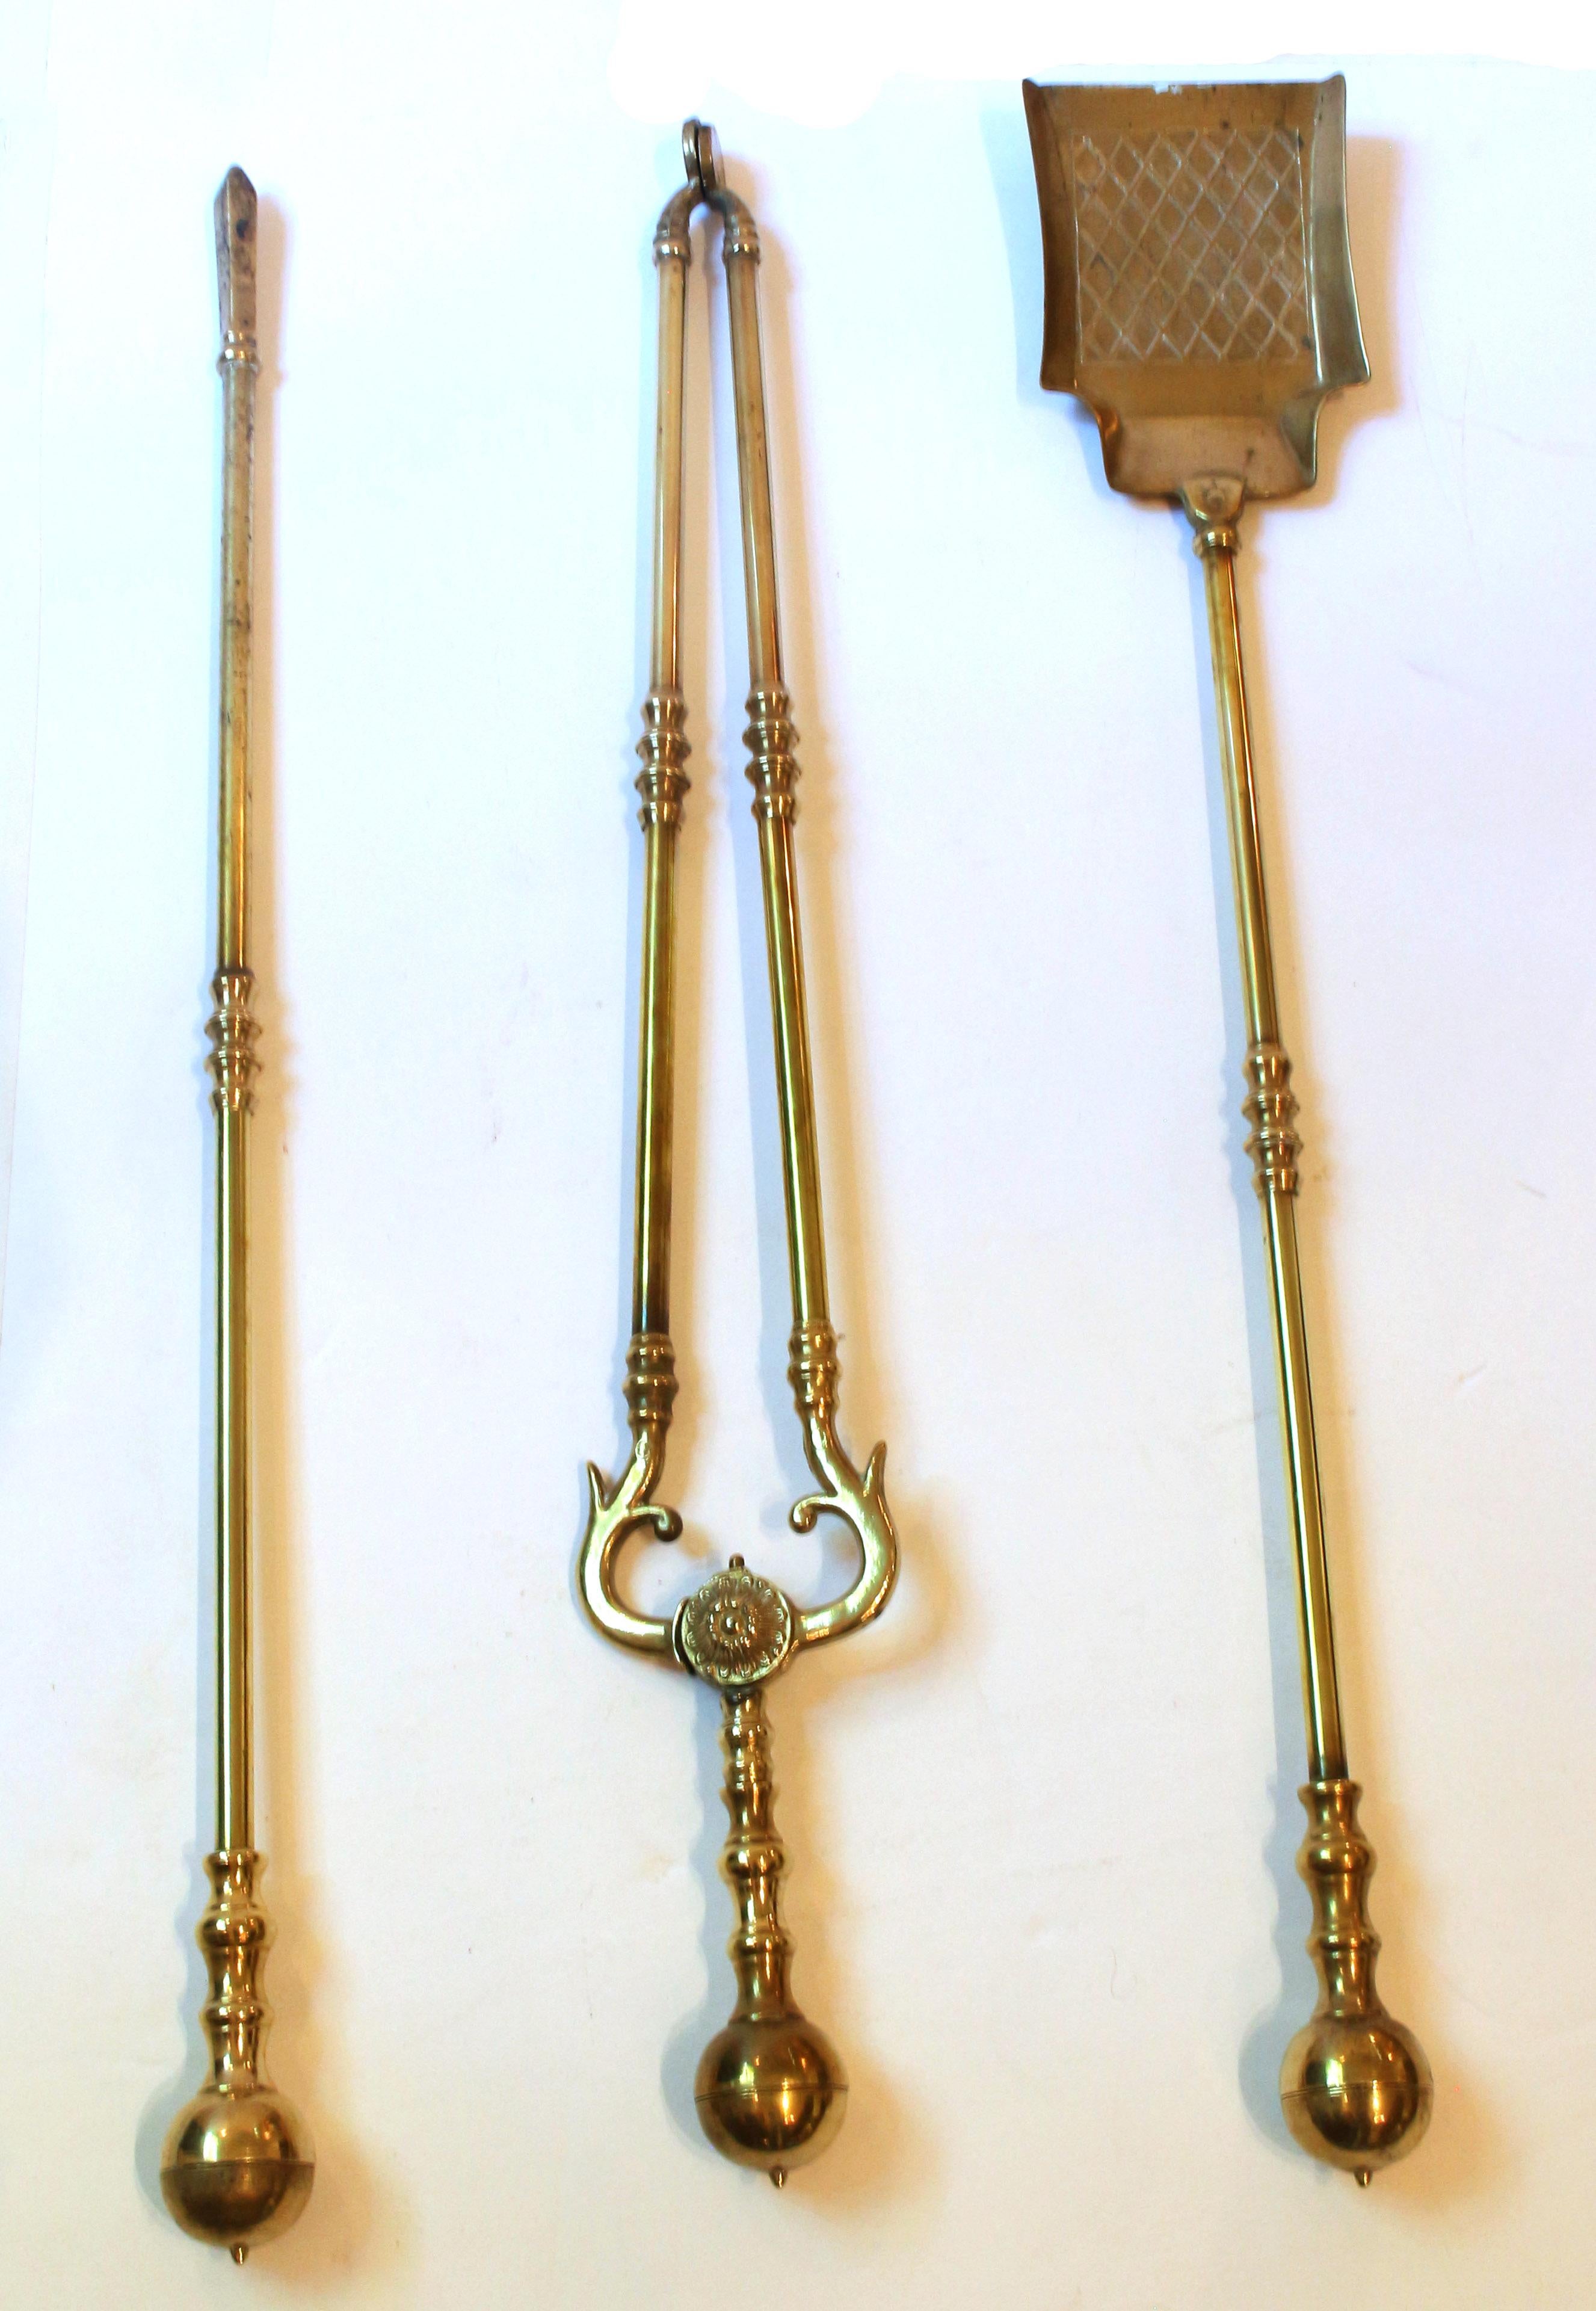 Early 20th century solid brass set of three fire tools, Anglo-American. Superb quality with large ball tops. Shovel, tongs & poker. Cast rosette medallion on tongs. Approx. 29